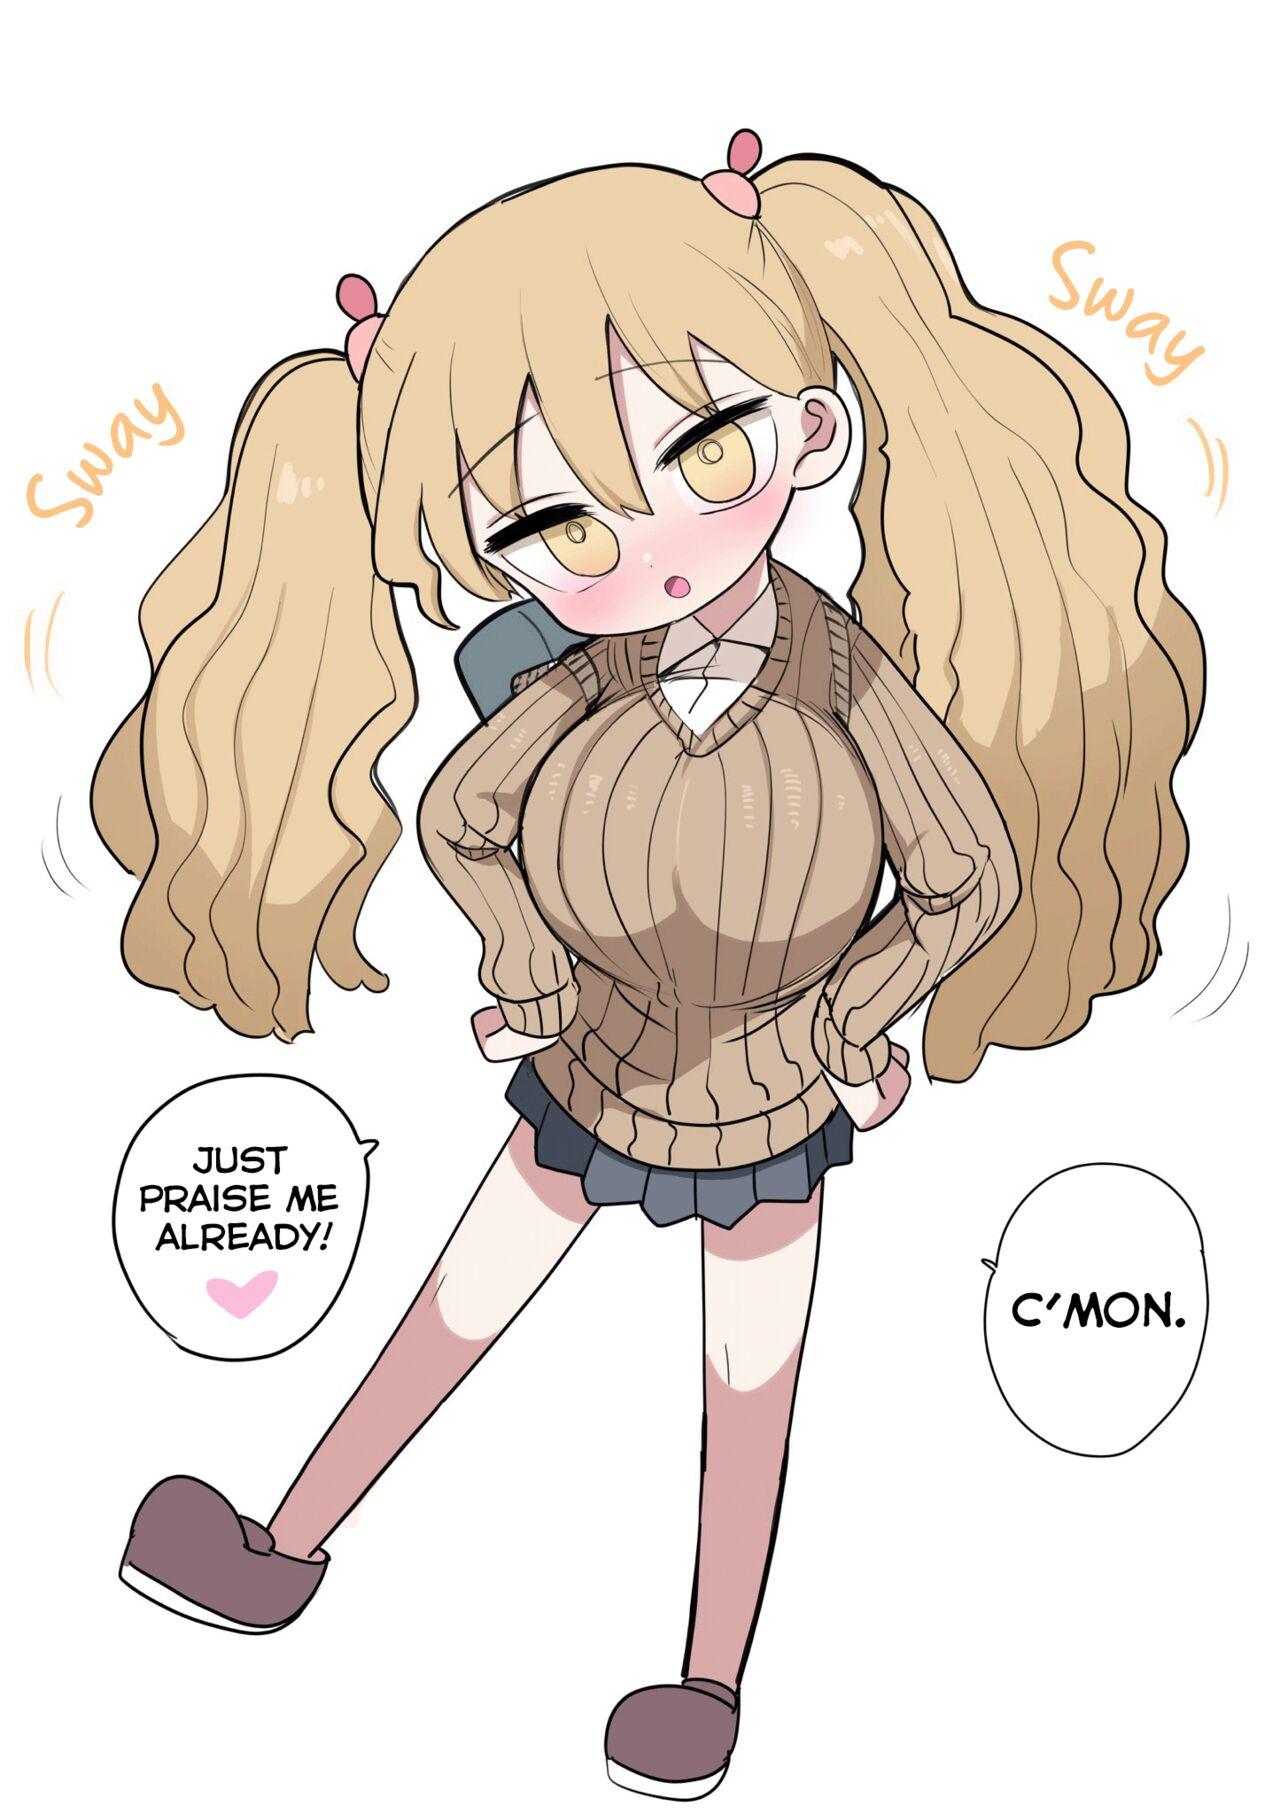 Chiisai Gal | The Small Gal 47